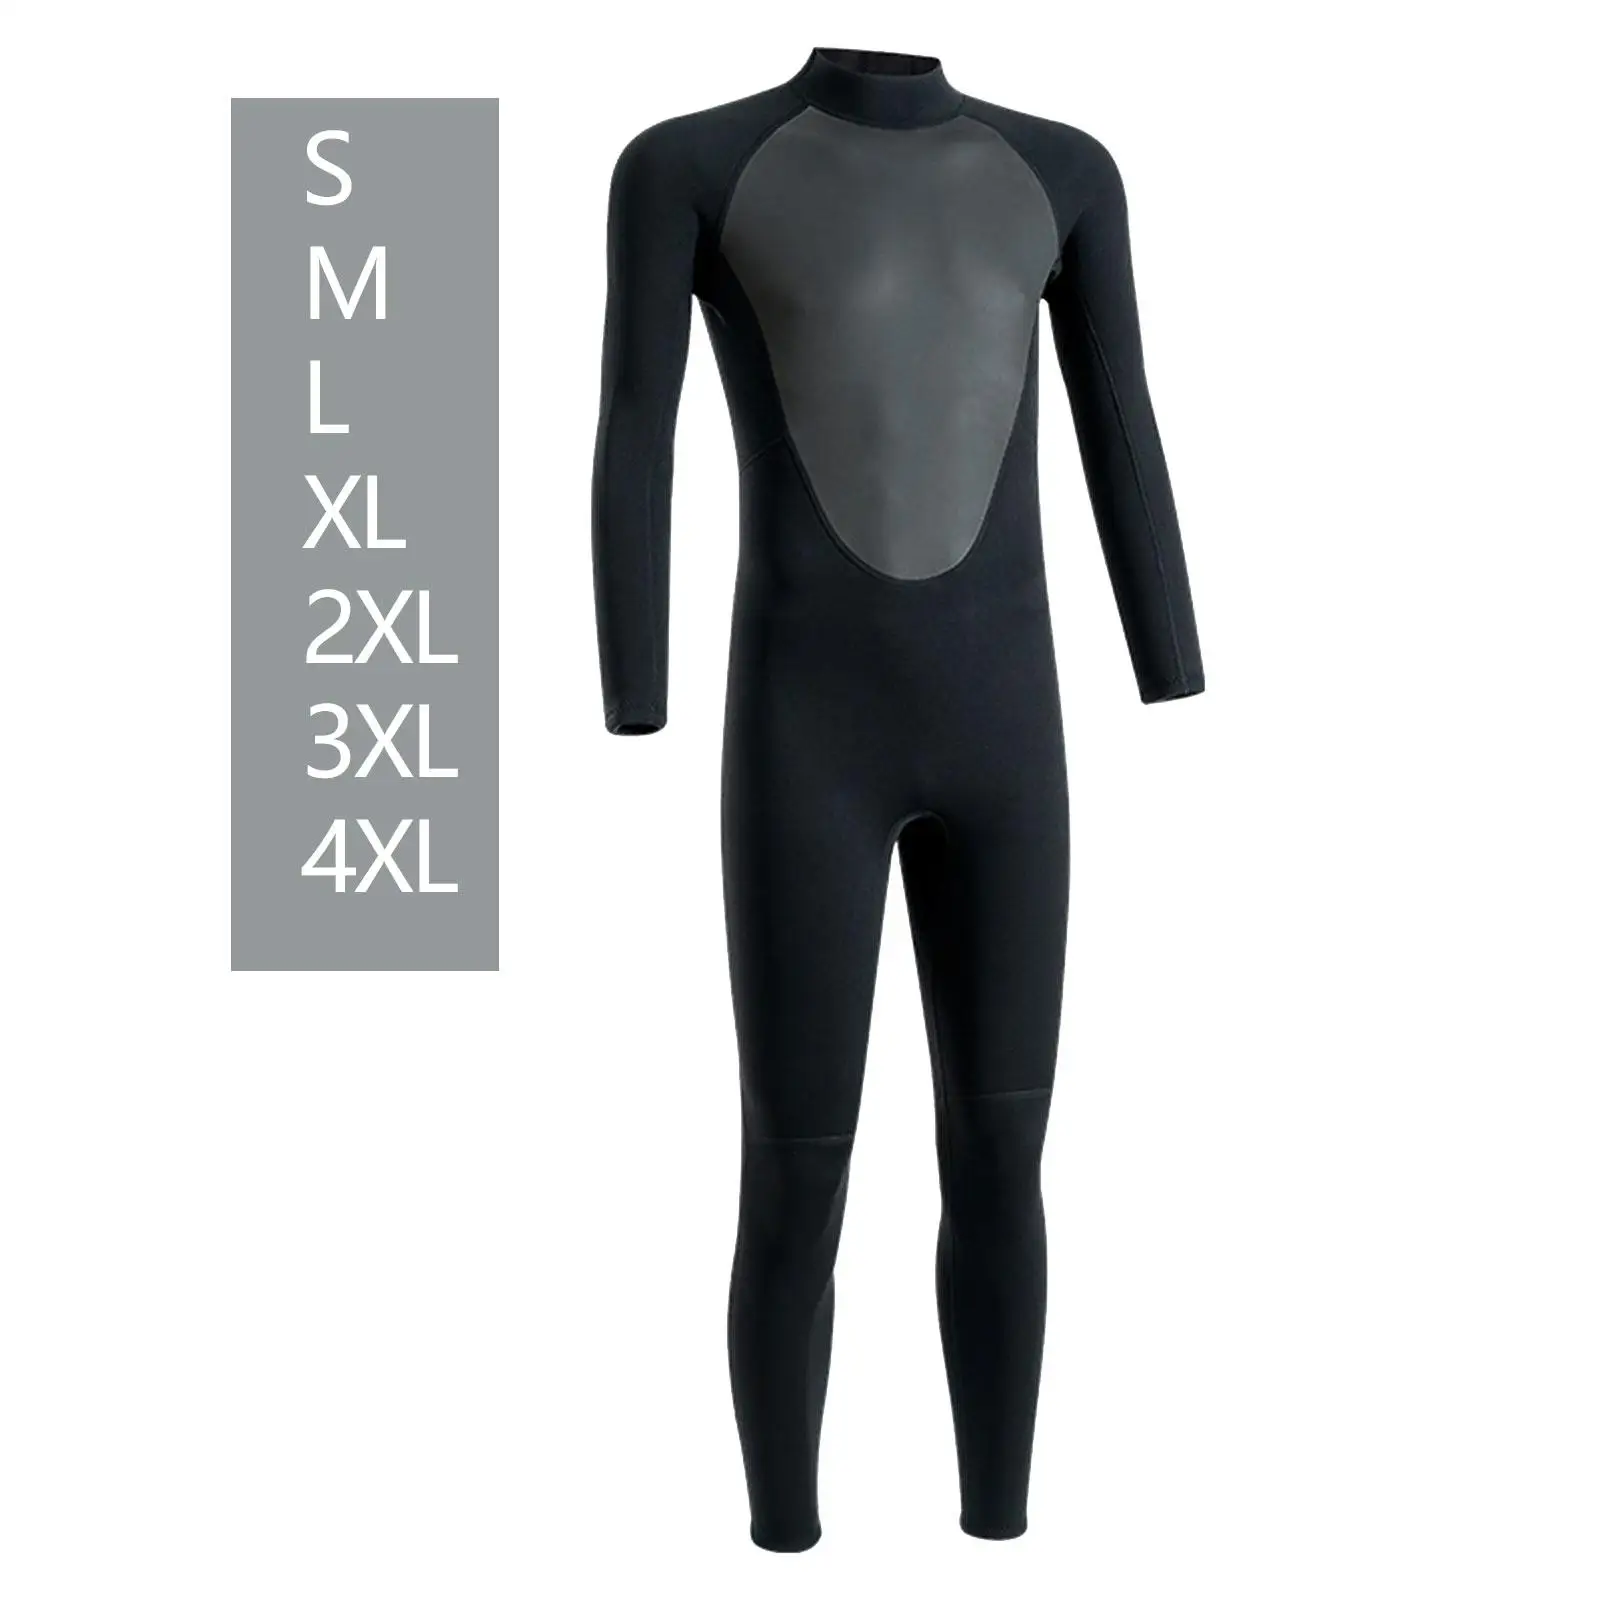 Full Wetsuit Full Body Wet Suit Surfing Suit Scuba Diving Suit for Water Sports